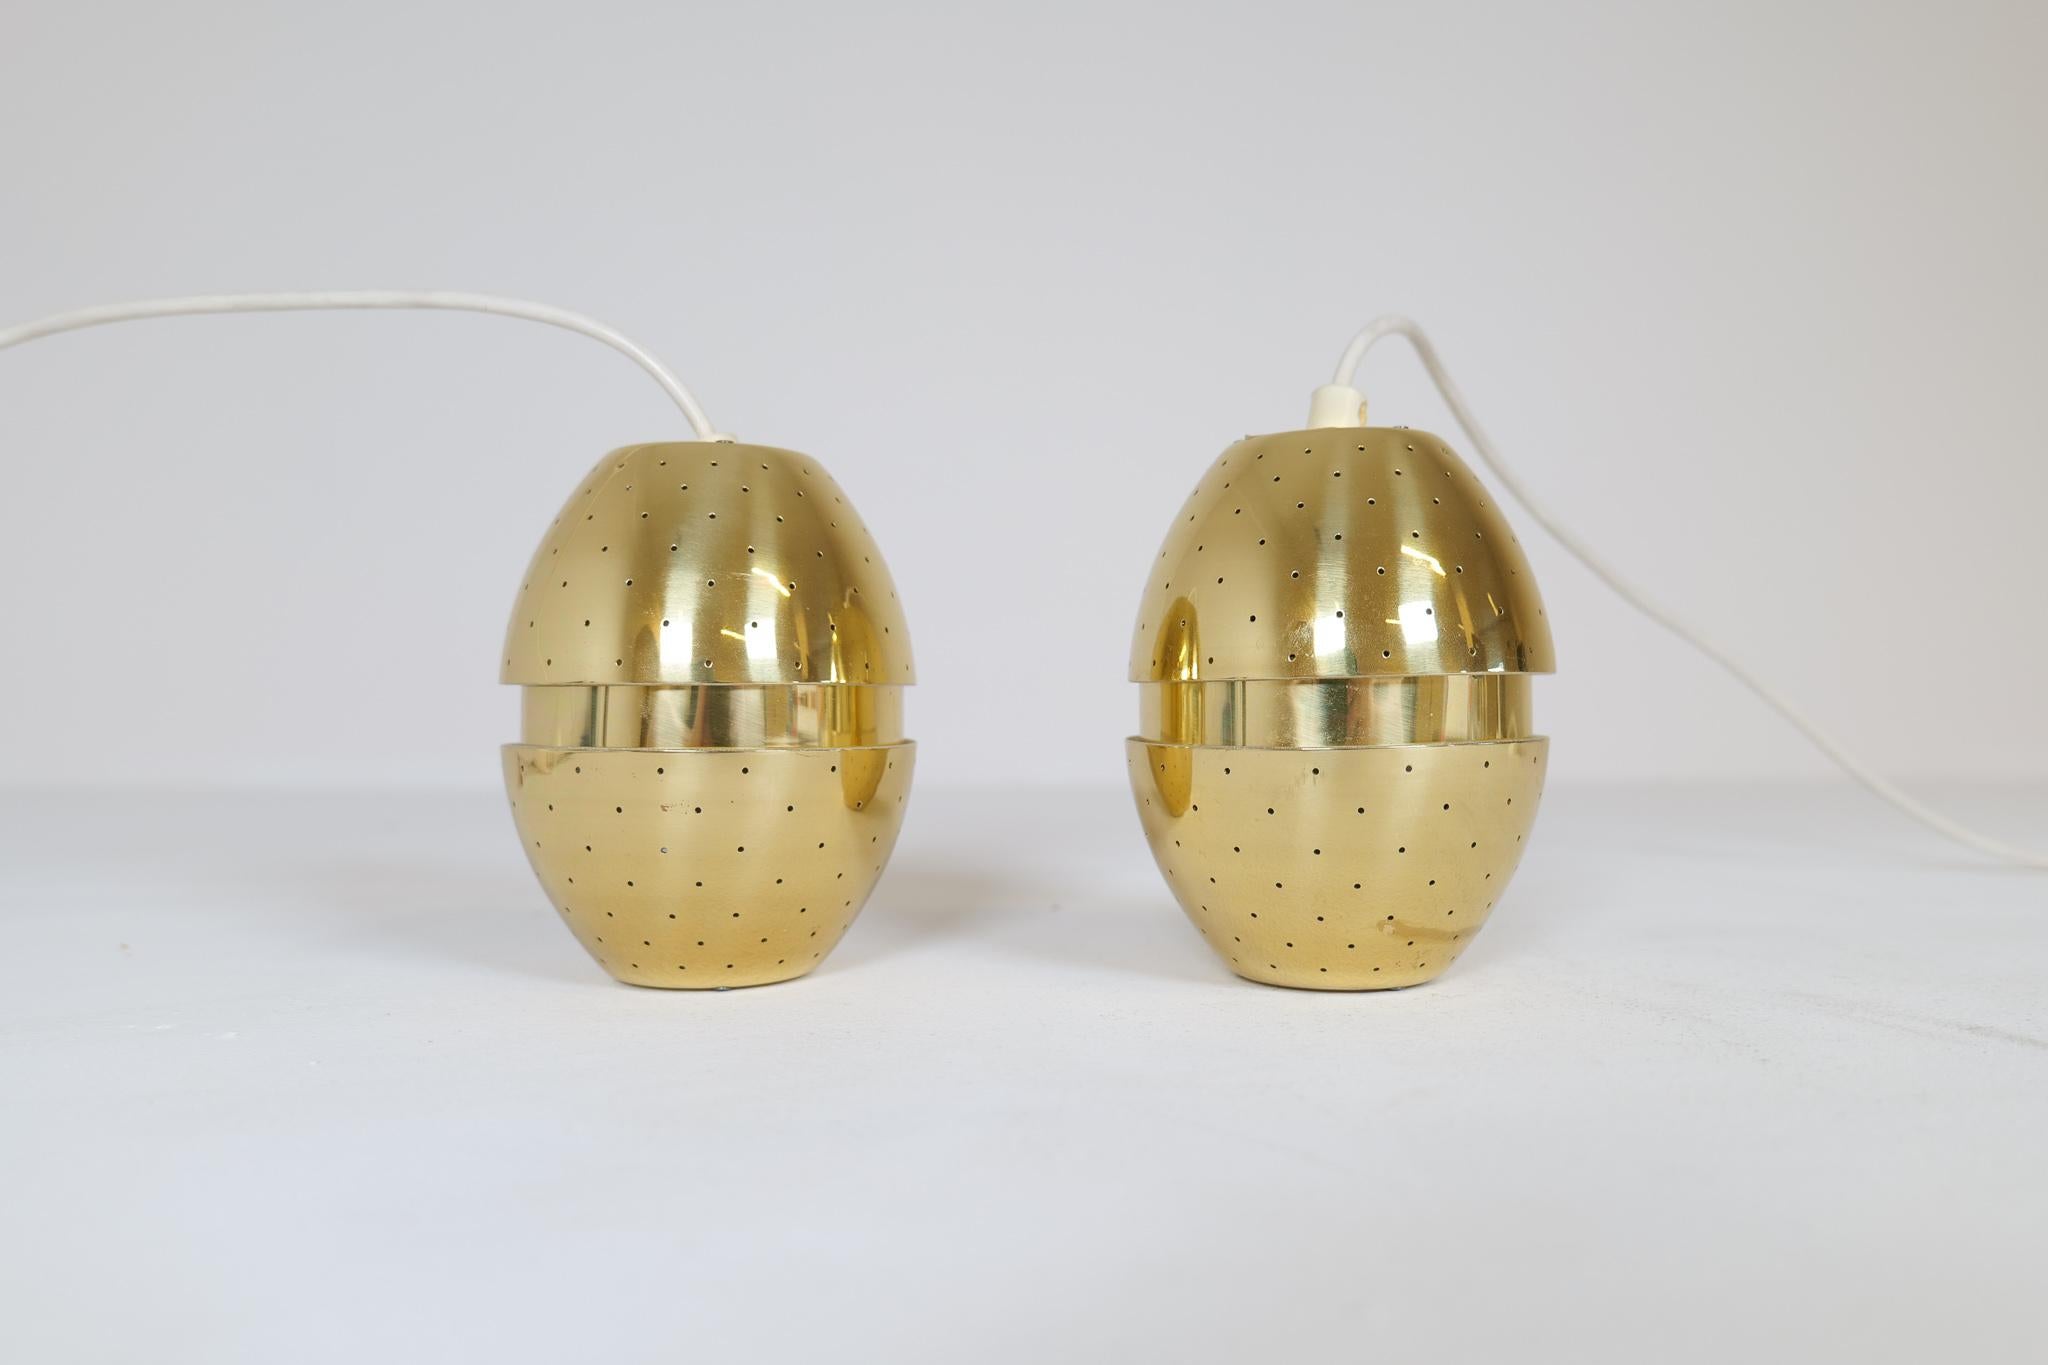 Nicely egg-shaped brass pendants designed by famous Swedish designer Hans Agne Jakobsson. Gives a beautiful shine and a cozy light. These pendants are rare to come by. 

Good vintage condition.

Measures Height: 6 in. (15.24 cm) Diameter: 5 in.